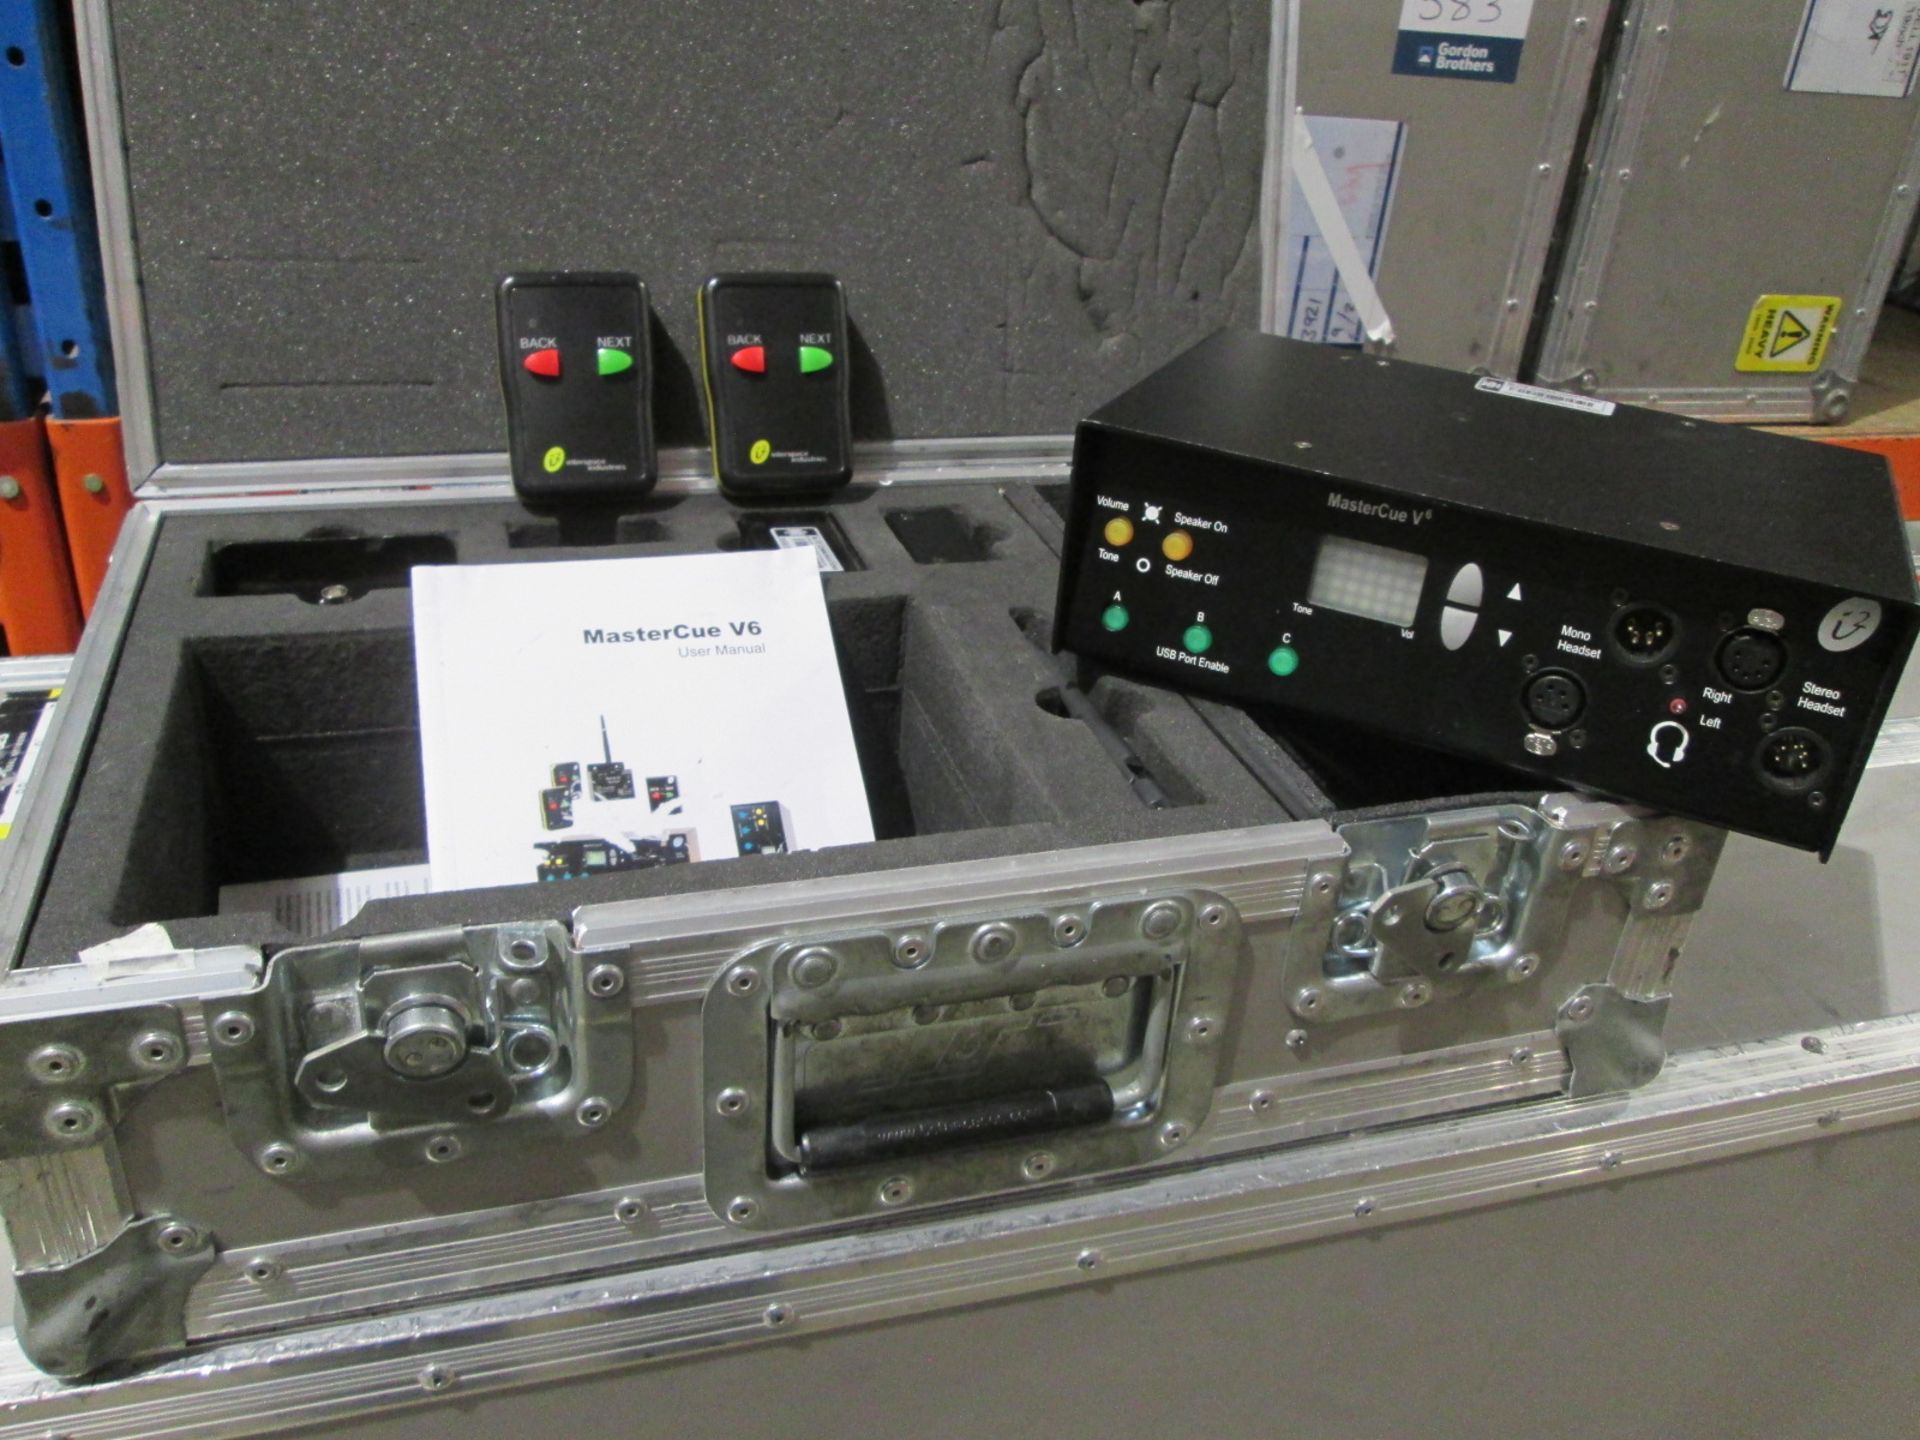 Interspace Industries Mastercue V6 Cue Light Kit (Qty 2) In flight case